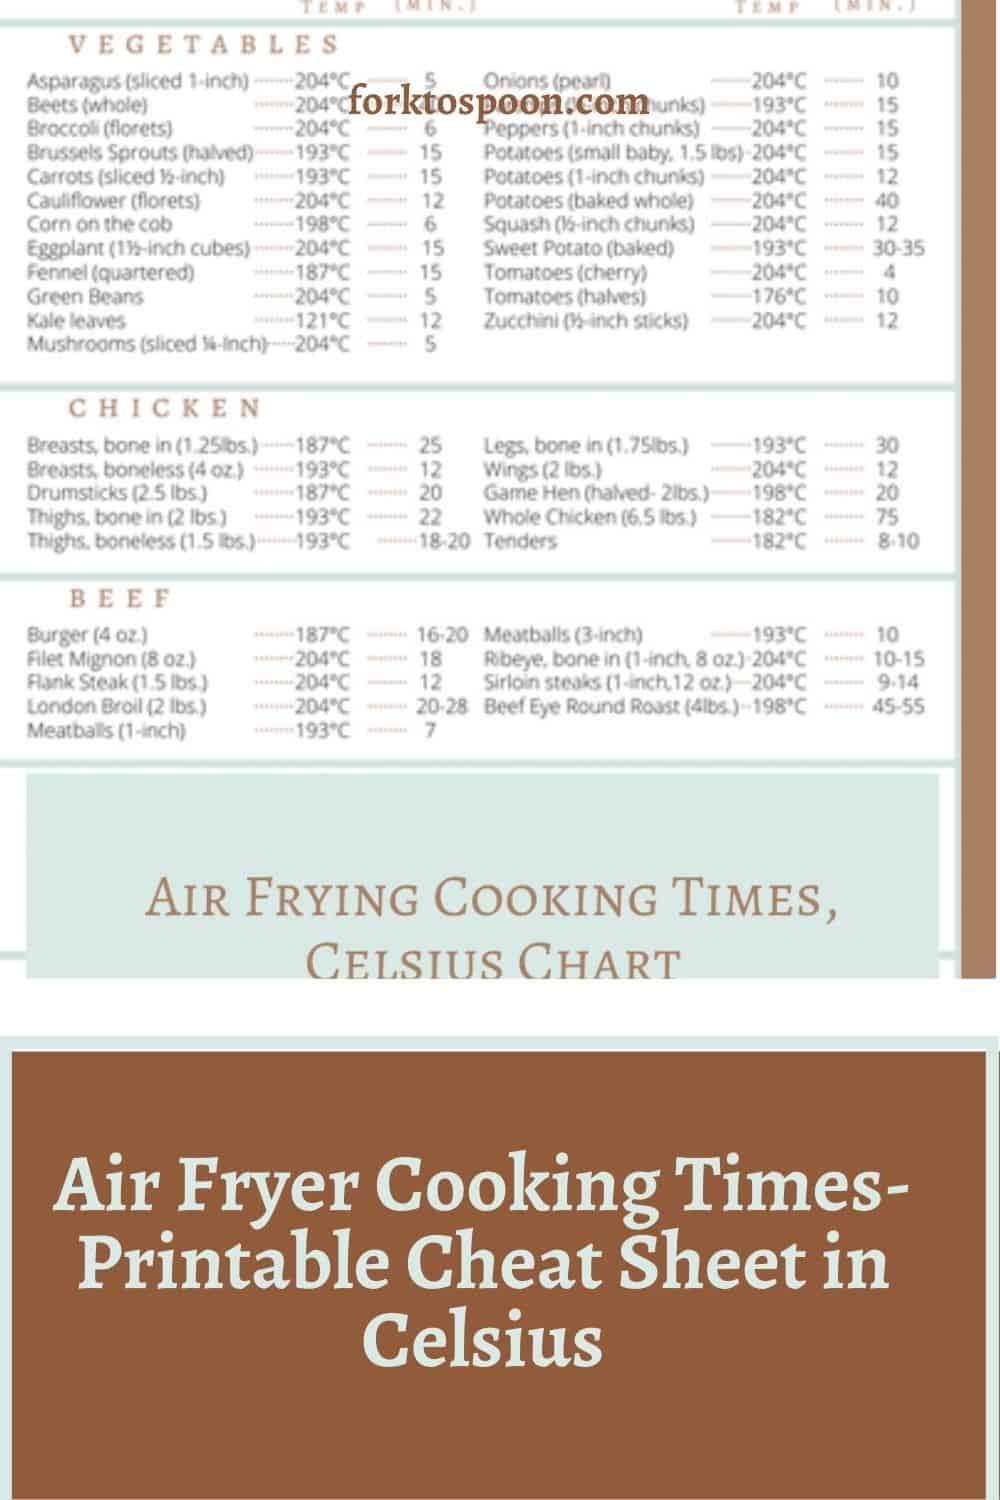 https://forktospoon.com/wp-content/uploads/2021/10/Air-Fryer-Cooking-Times-Printable-Cheat-Sheet-in-Celsius-1.jpg